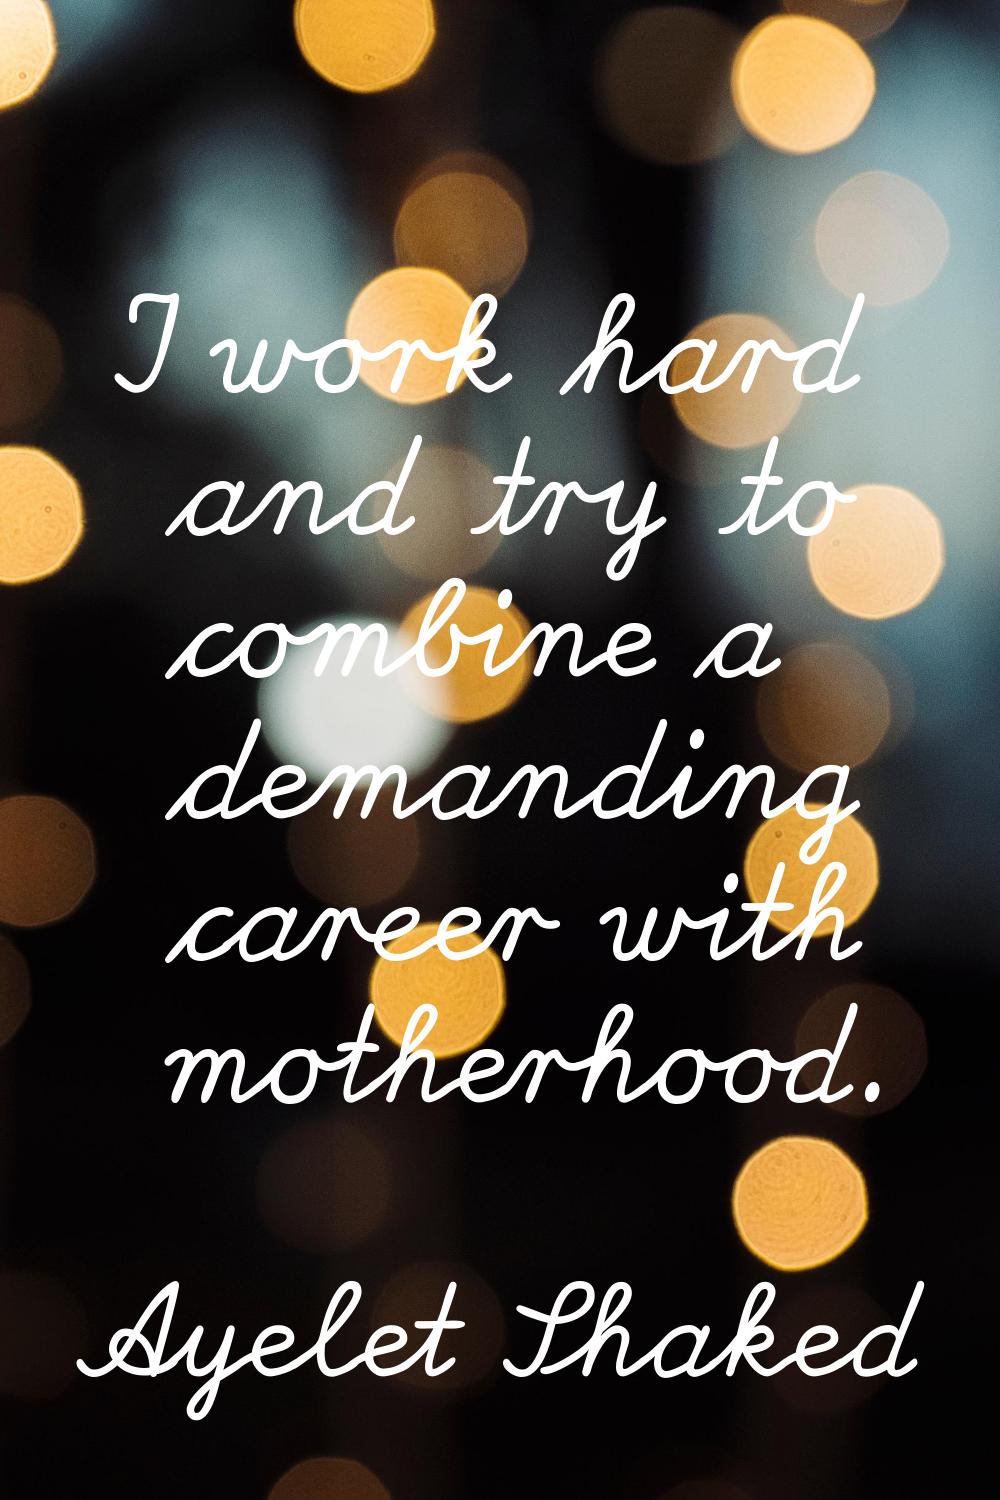 I work hard and try to combine a demanding career with motherhood.